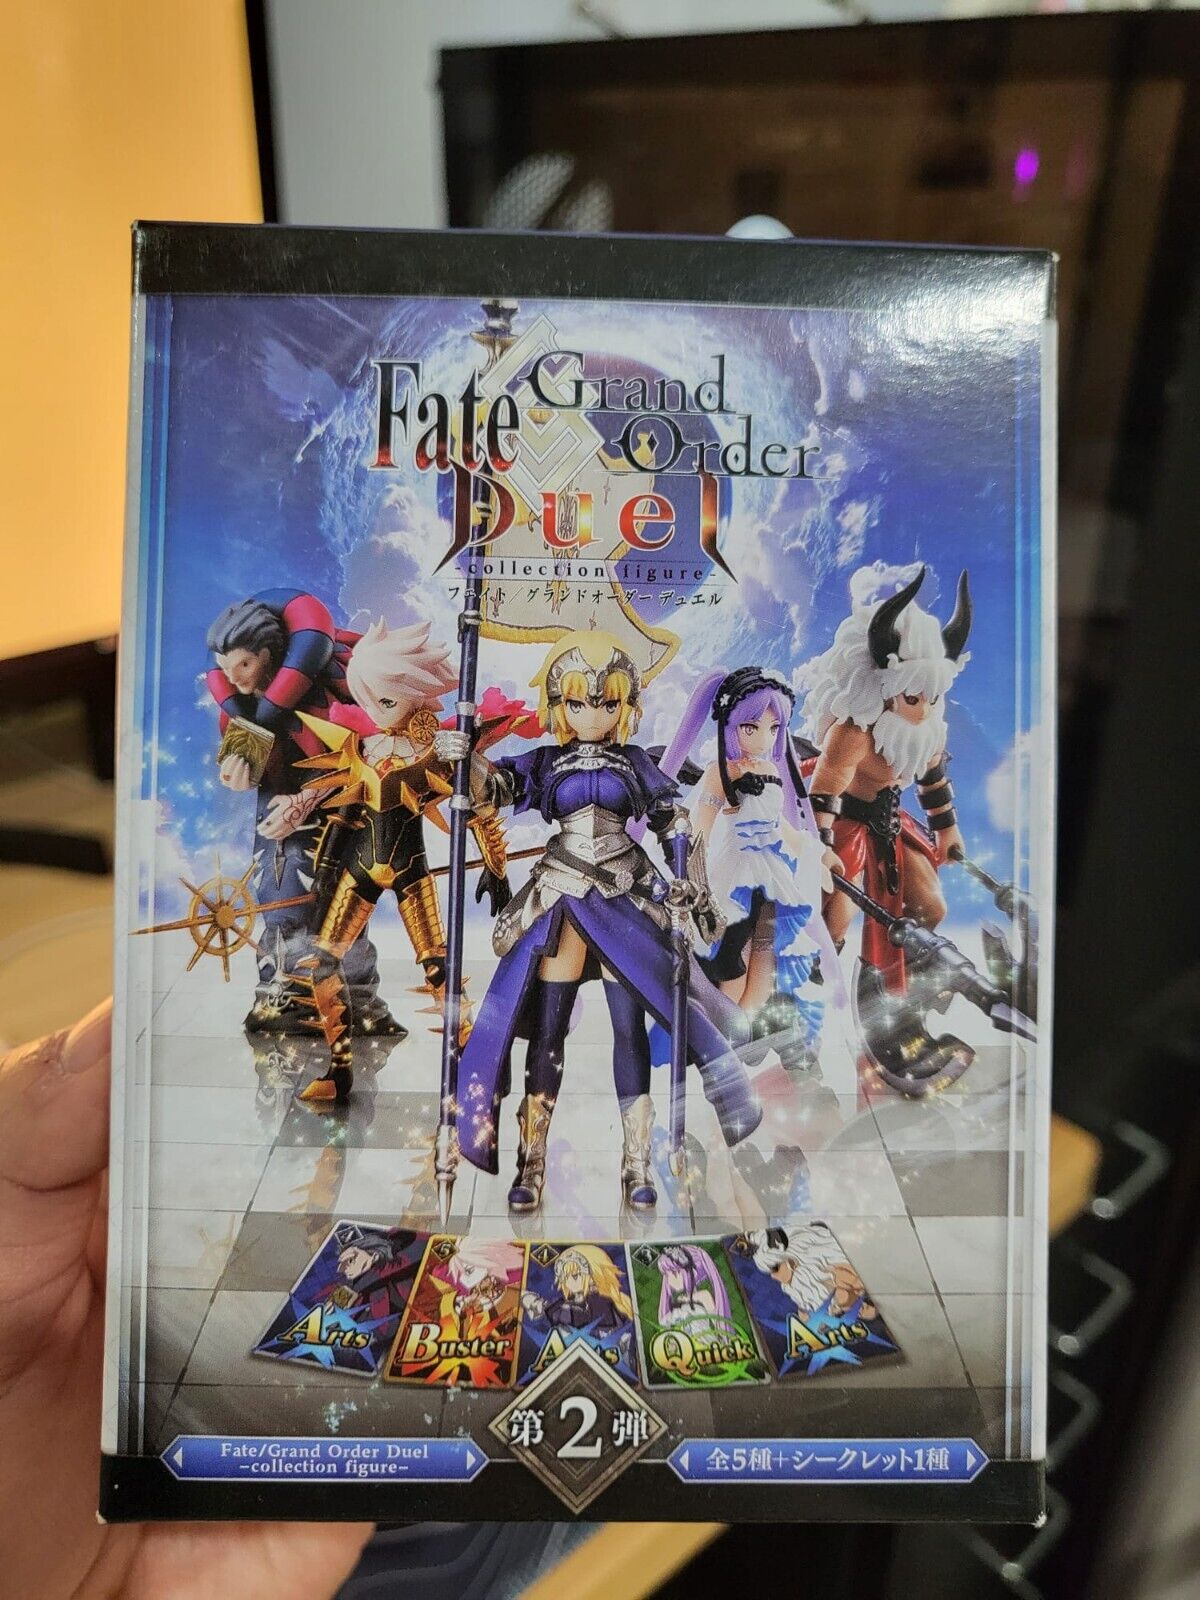 Fate/ Grand Order Duel -Collection Figure- Blind Box (Fifth Release)